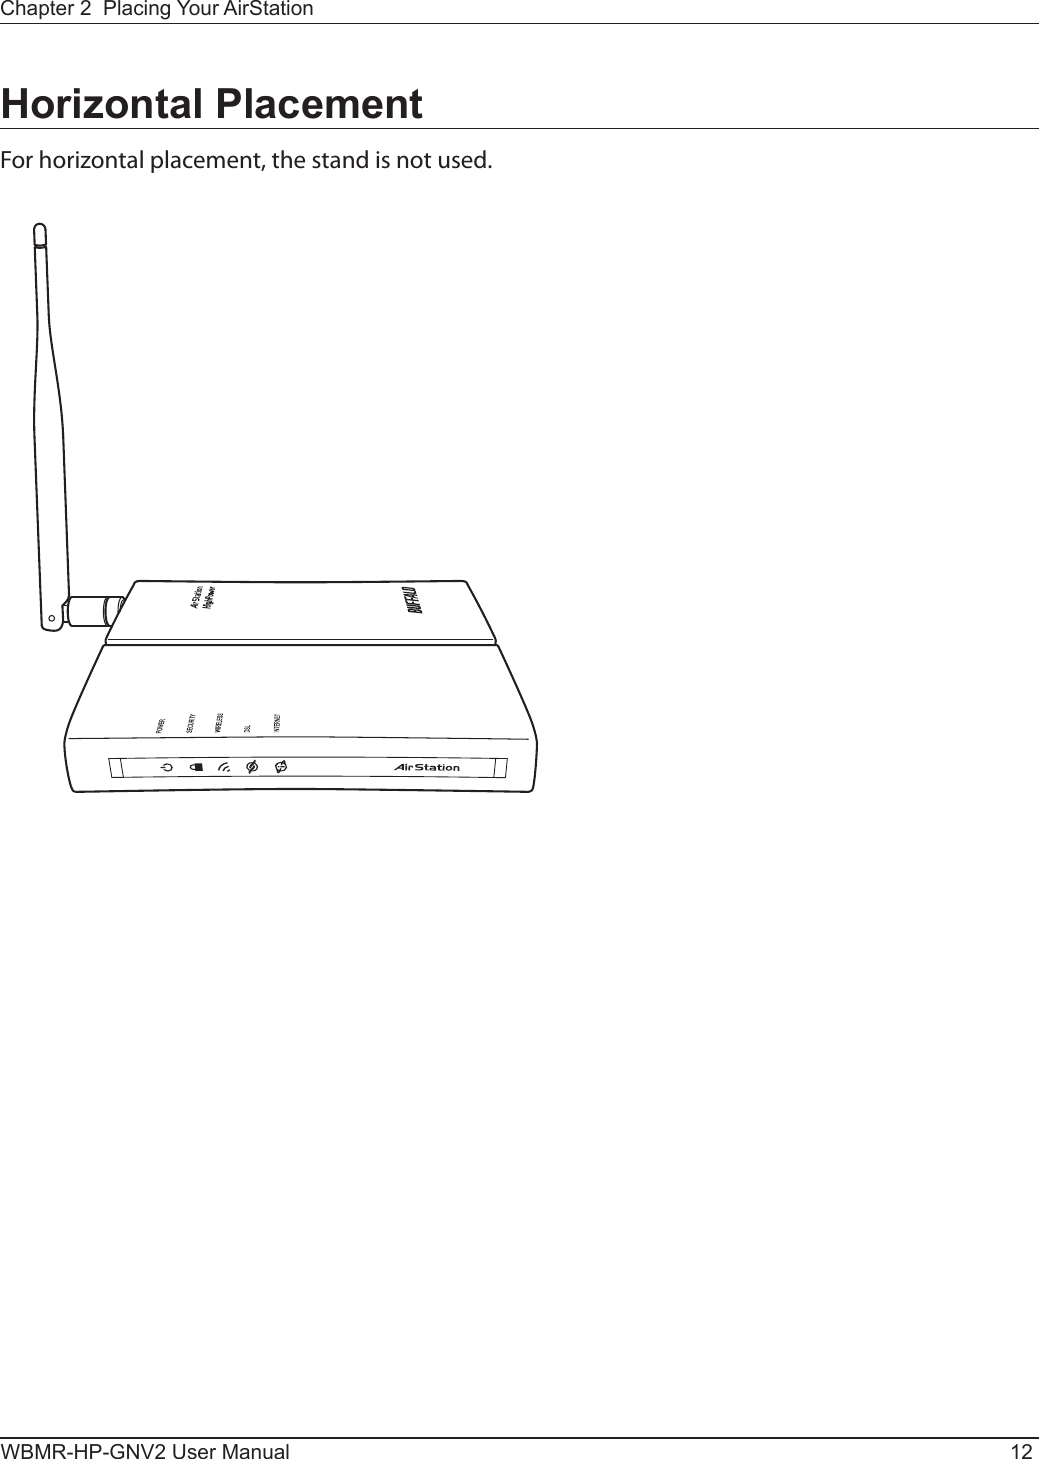 WBMR-HP-GNV2 User Manual 12Chapter 2  Placing Your AirStationHorizontal PlacementFor horizontal placement, the stand is not used.